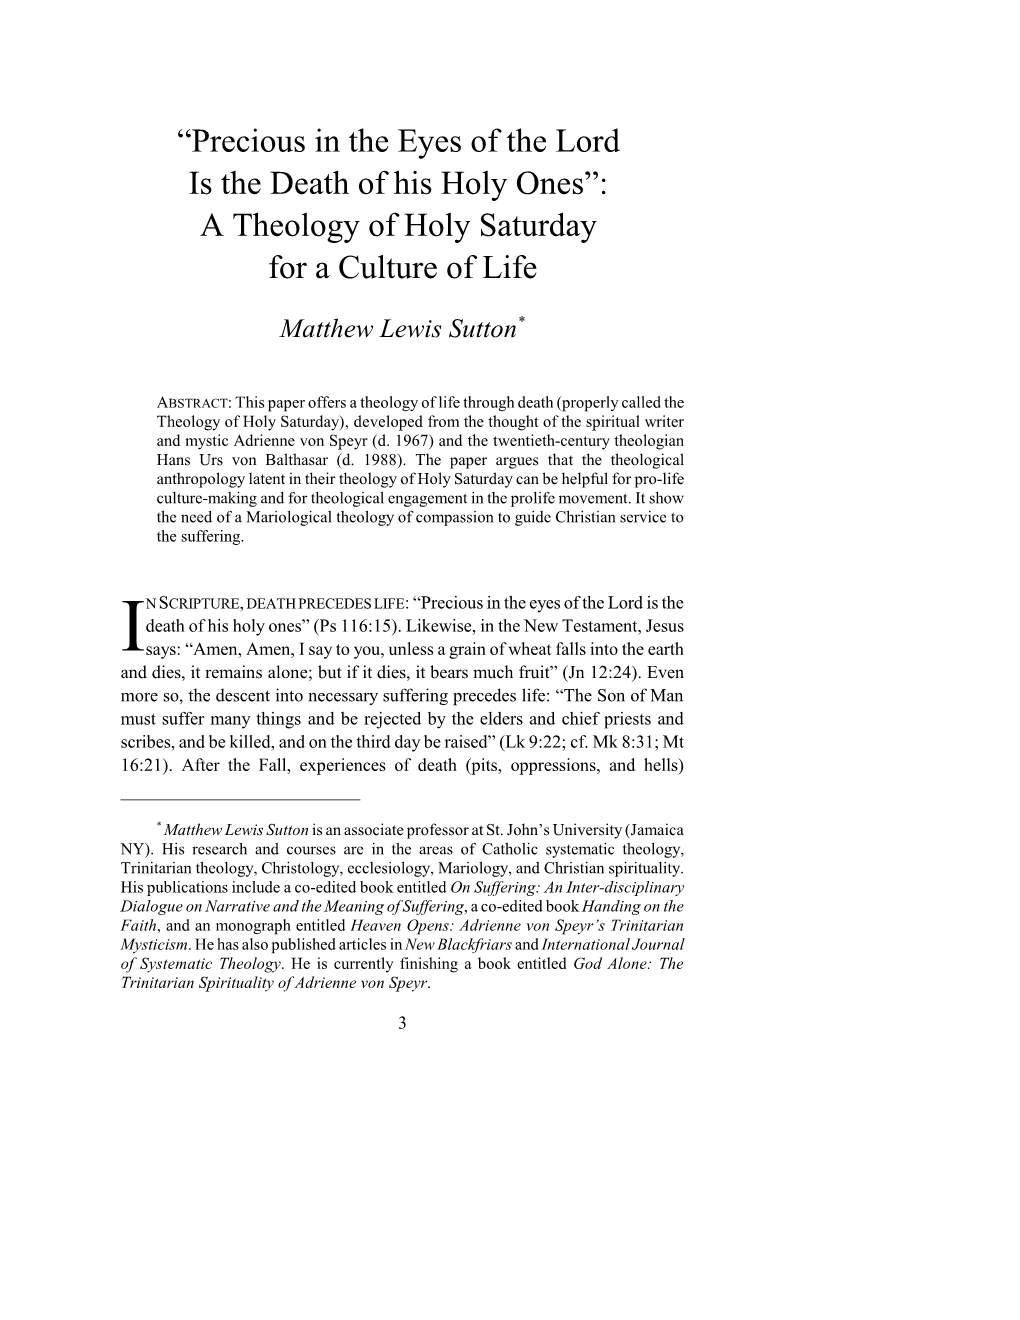 “Precious in the Eyes of the Lord Is the Death of His Holy Ones”: a Theology of Holy Saturday for a Culture of Life